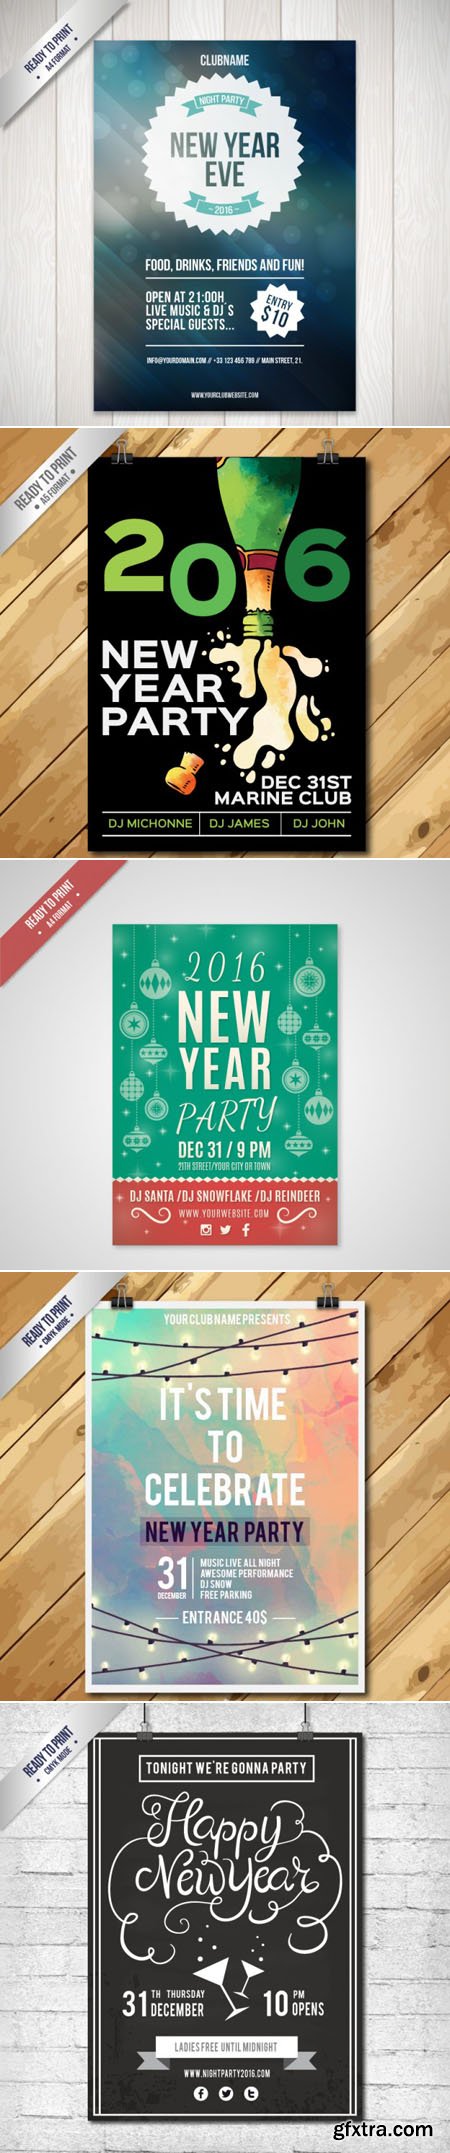 New Year 2016 Party Posters Templates in Vector